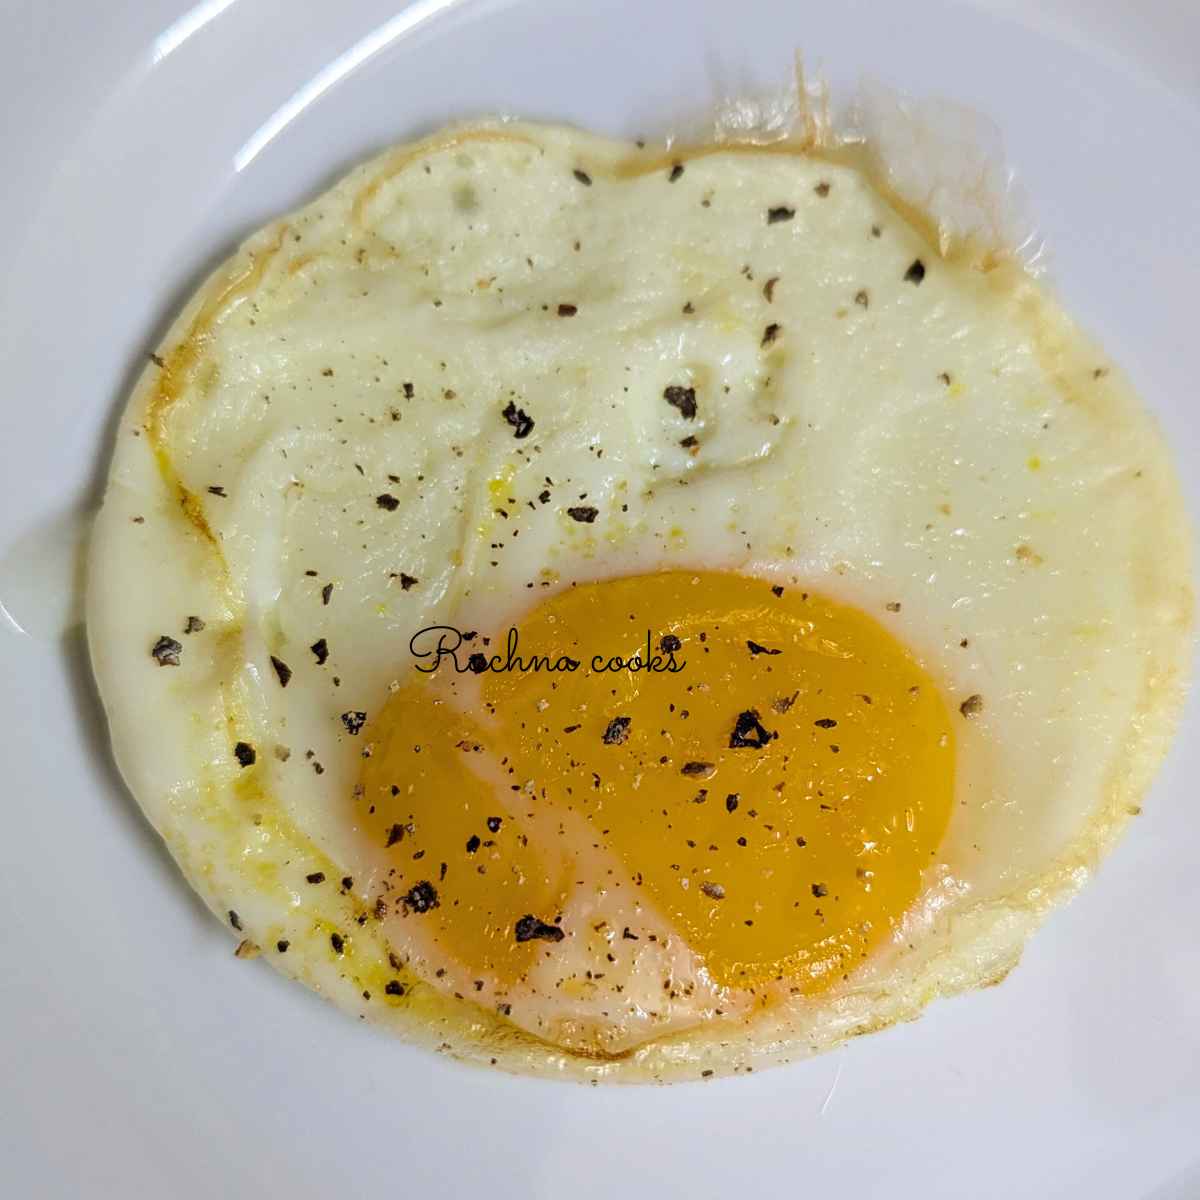 Delicious fried egg with salt and pepper on a white plate.